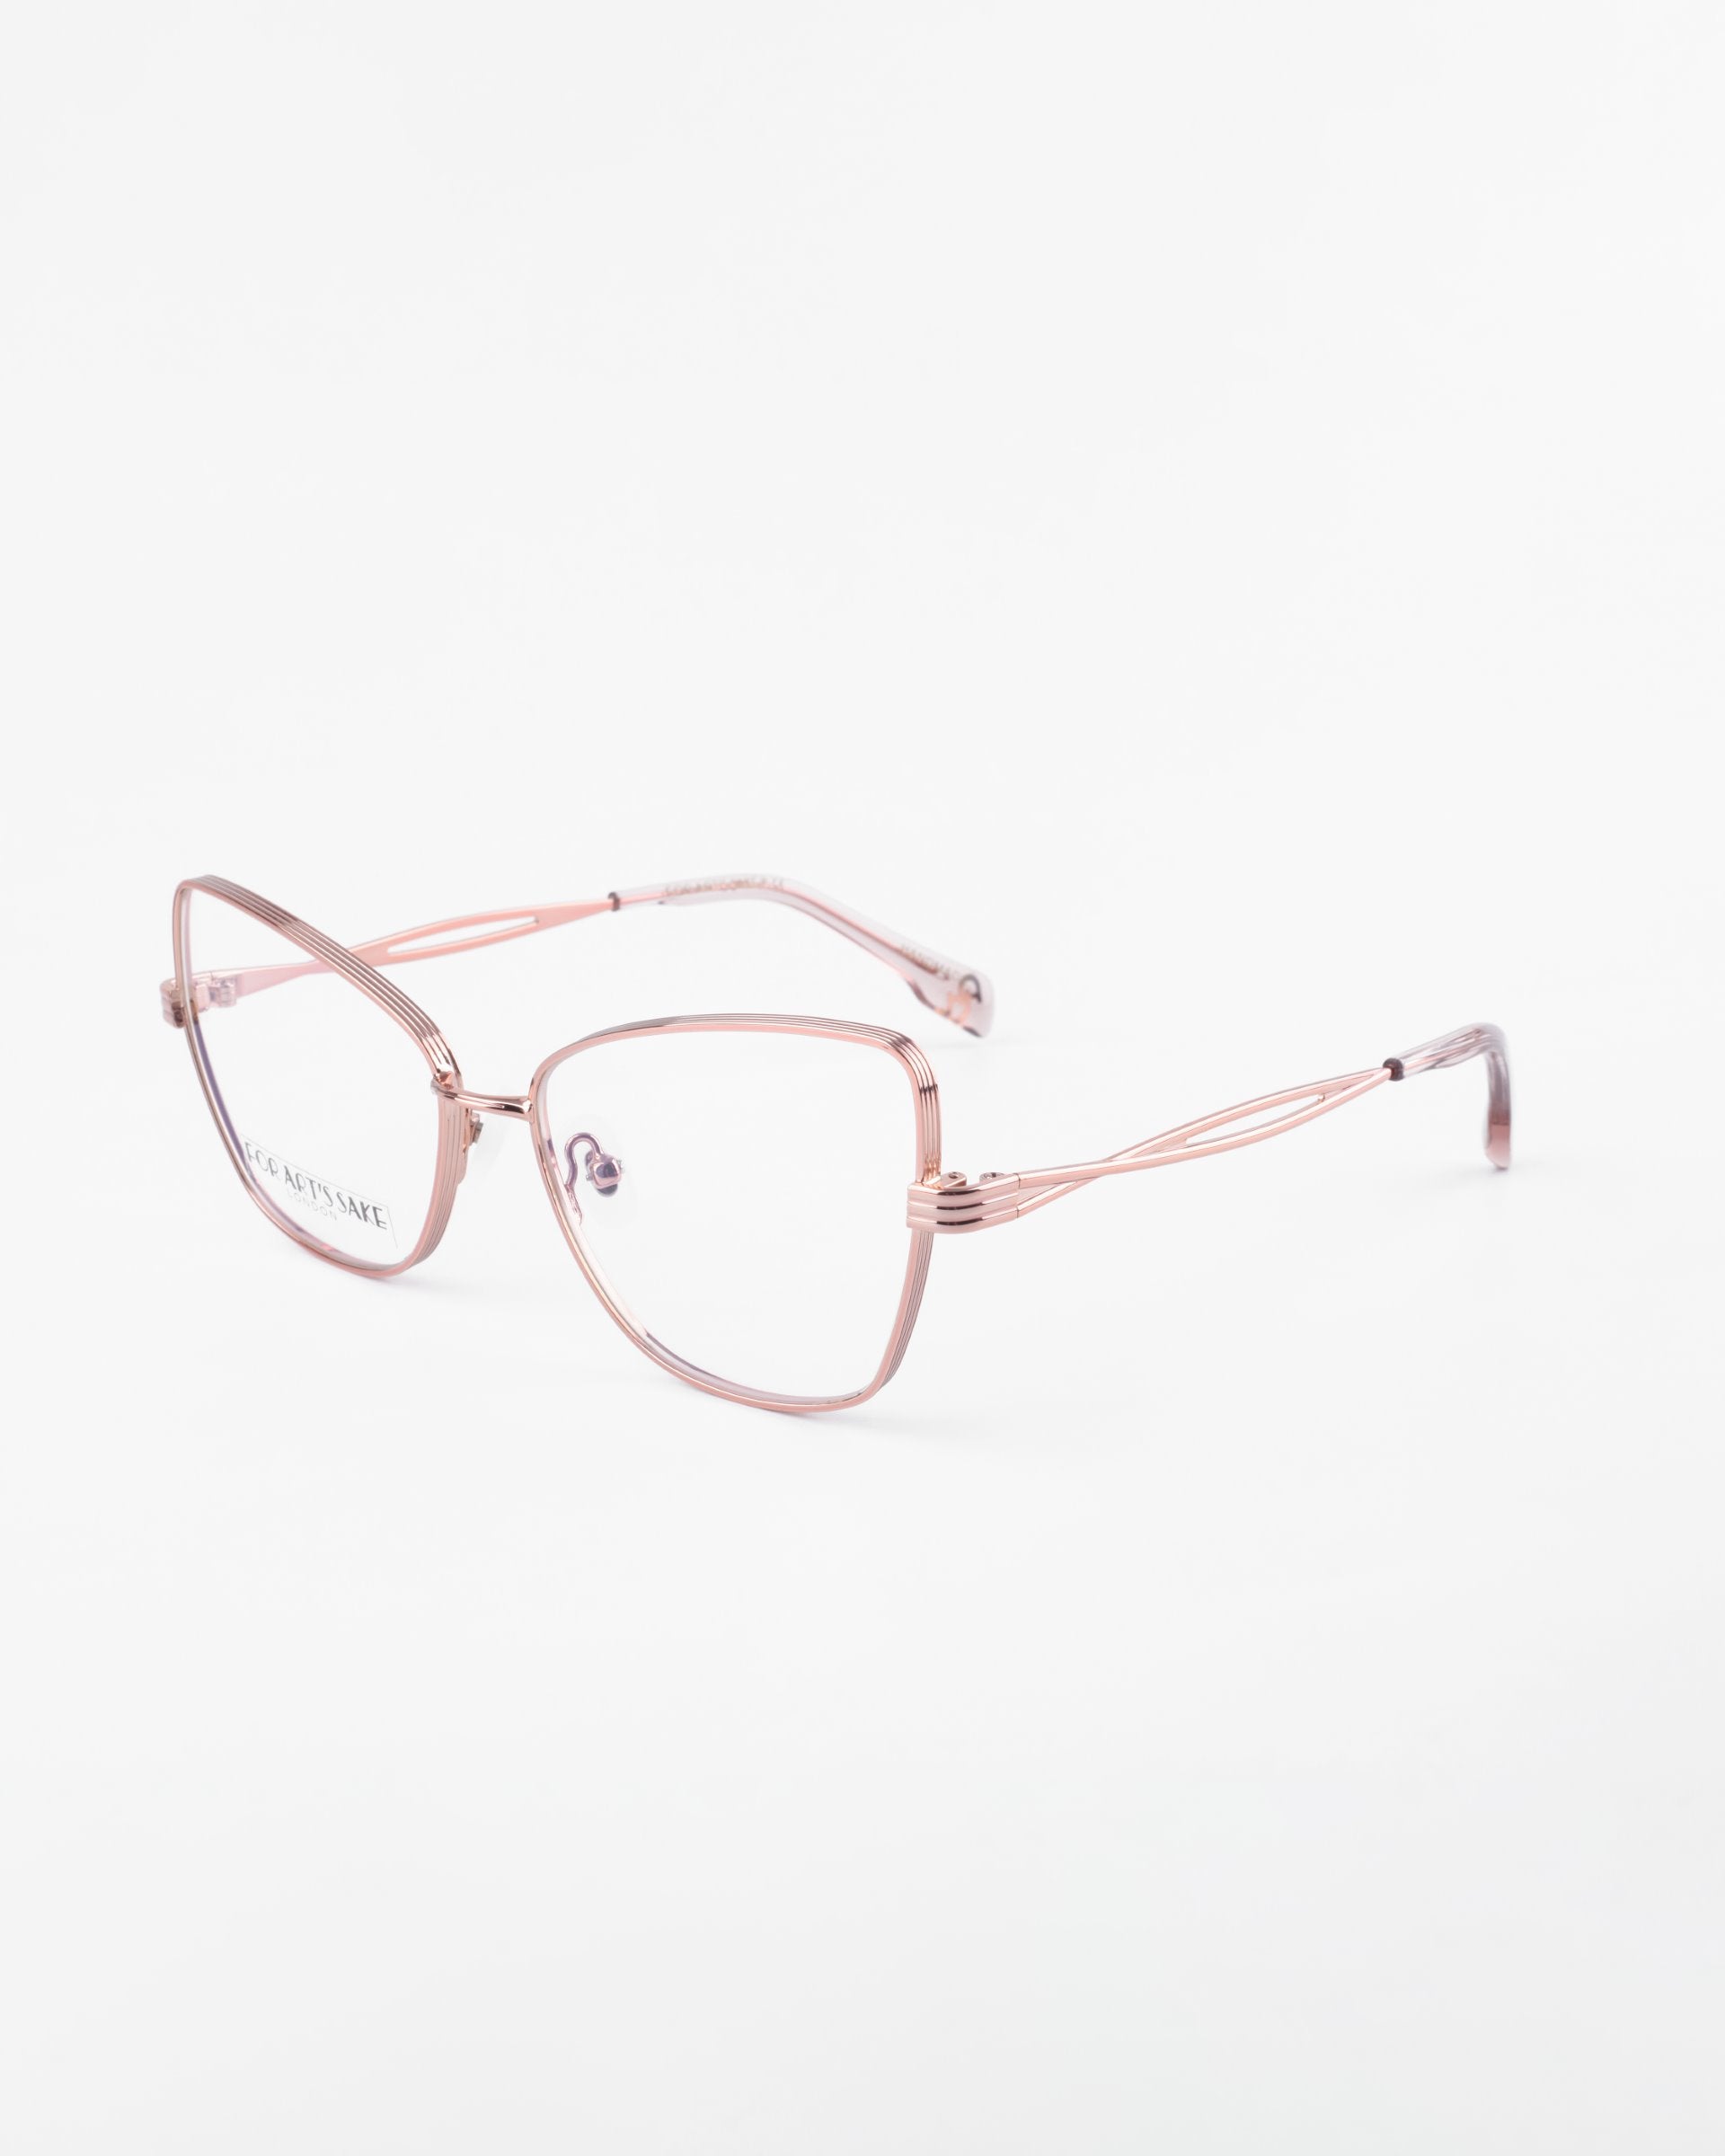 A pair of Lady eyeglasses by For Art&#39;s Sake® with thin, metallic rose gold frames and large, slightly rectangular lenses. Featuring blue light filter prescription lenses, the glasses rest on a white background, showcasing small nose pads and slender, intricately designed side temples for a modern and elegant look.